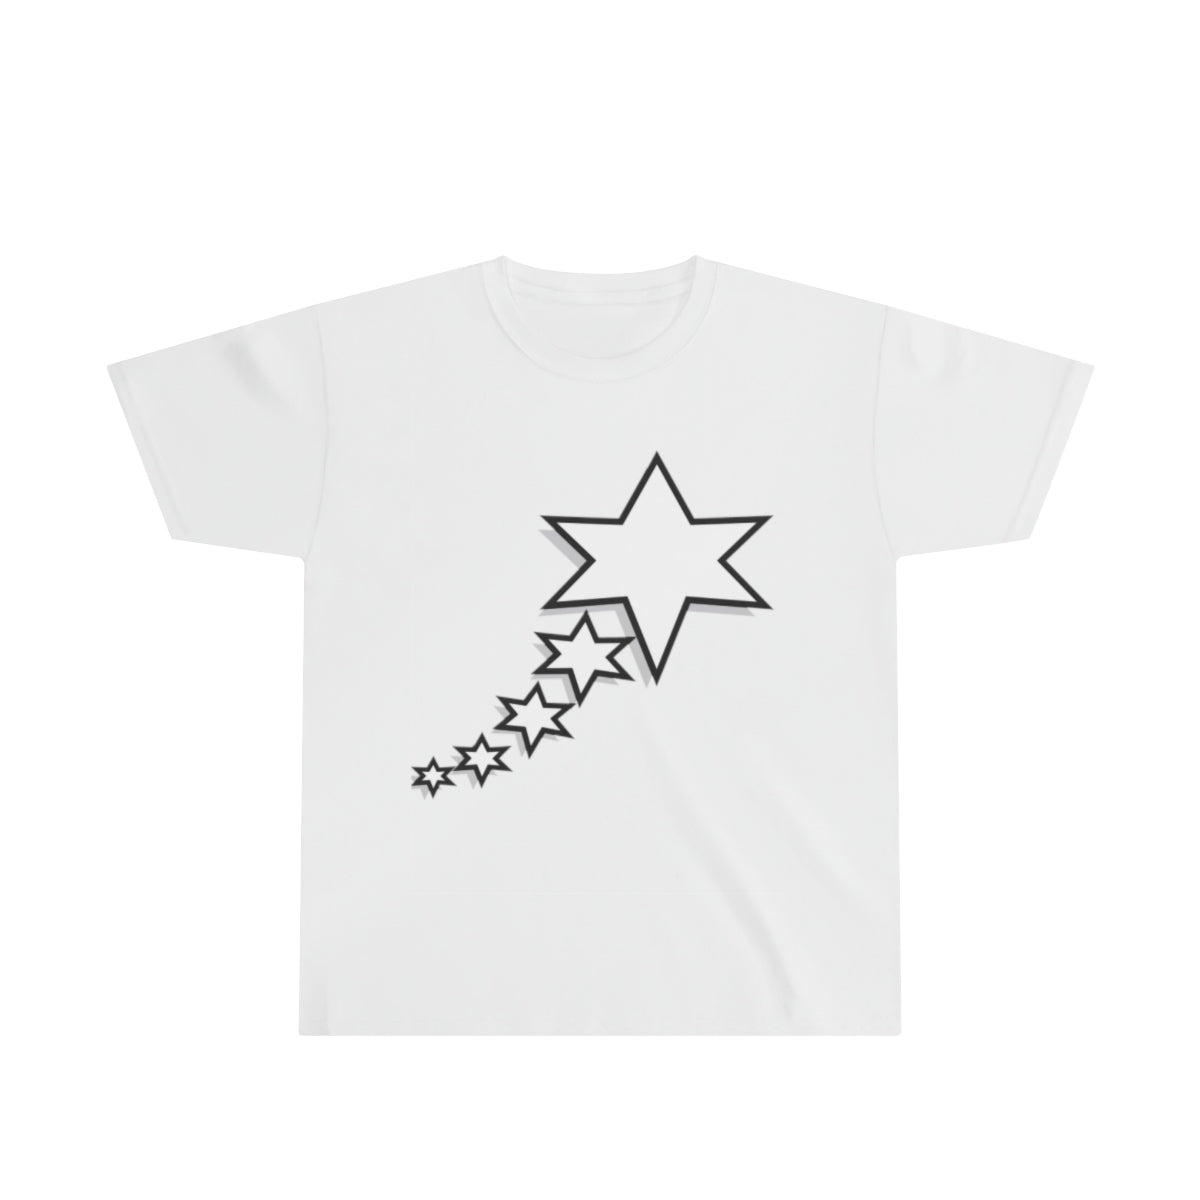 Youth Ultra Cotton Tee - 6 Points 5 Stars (White)